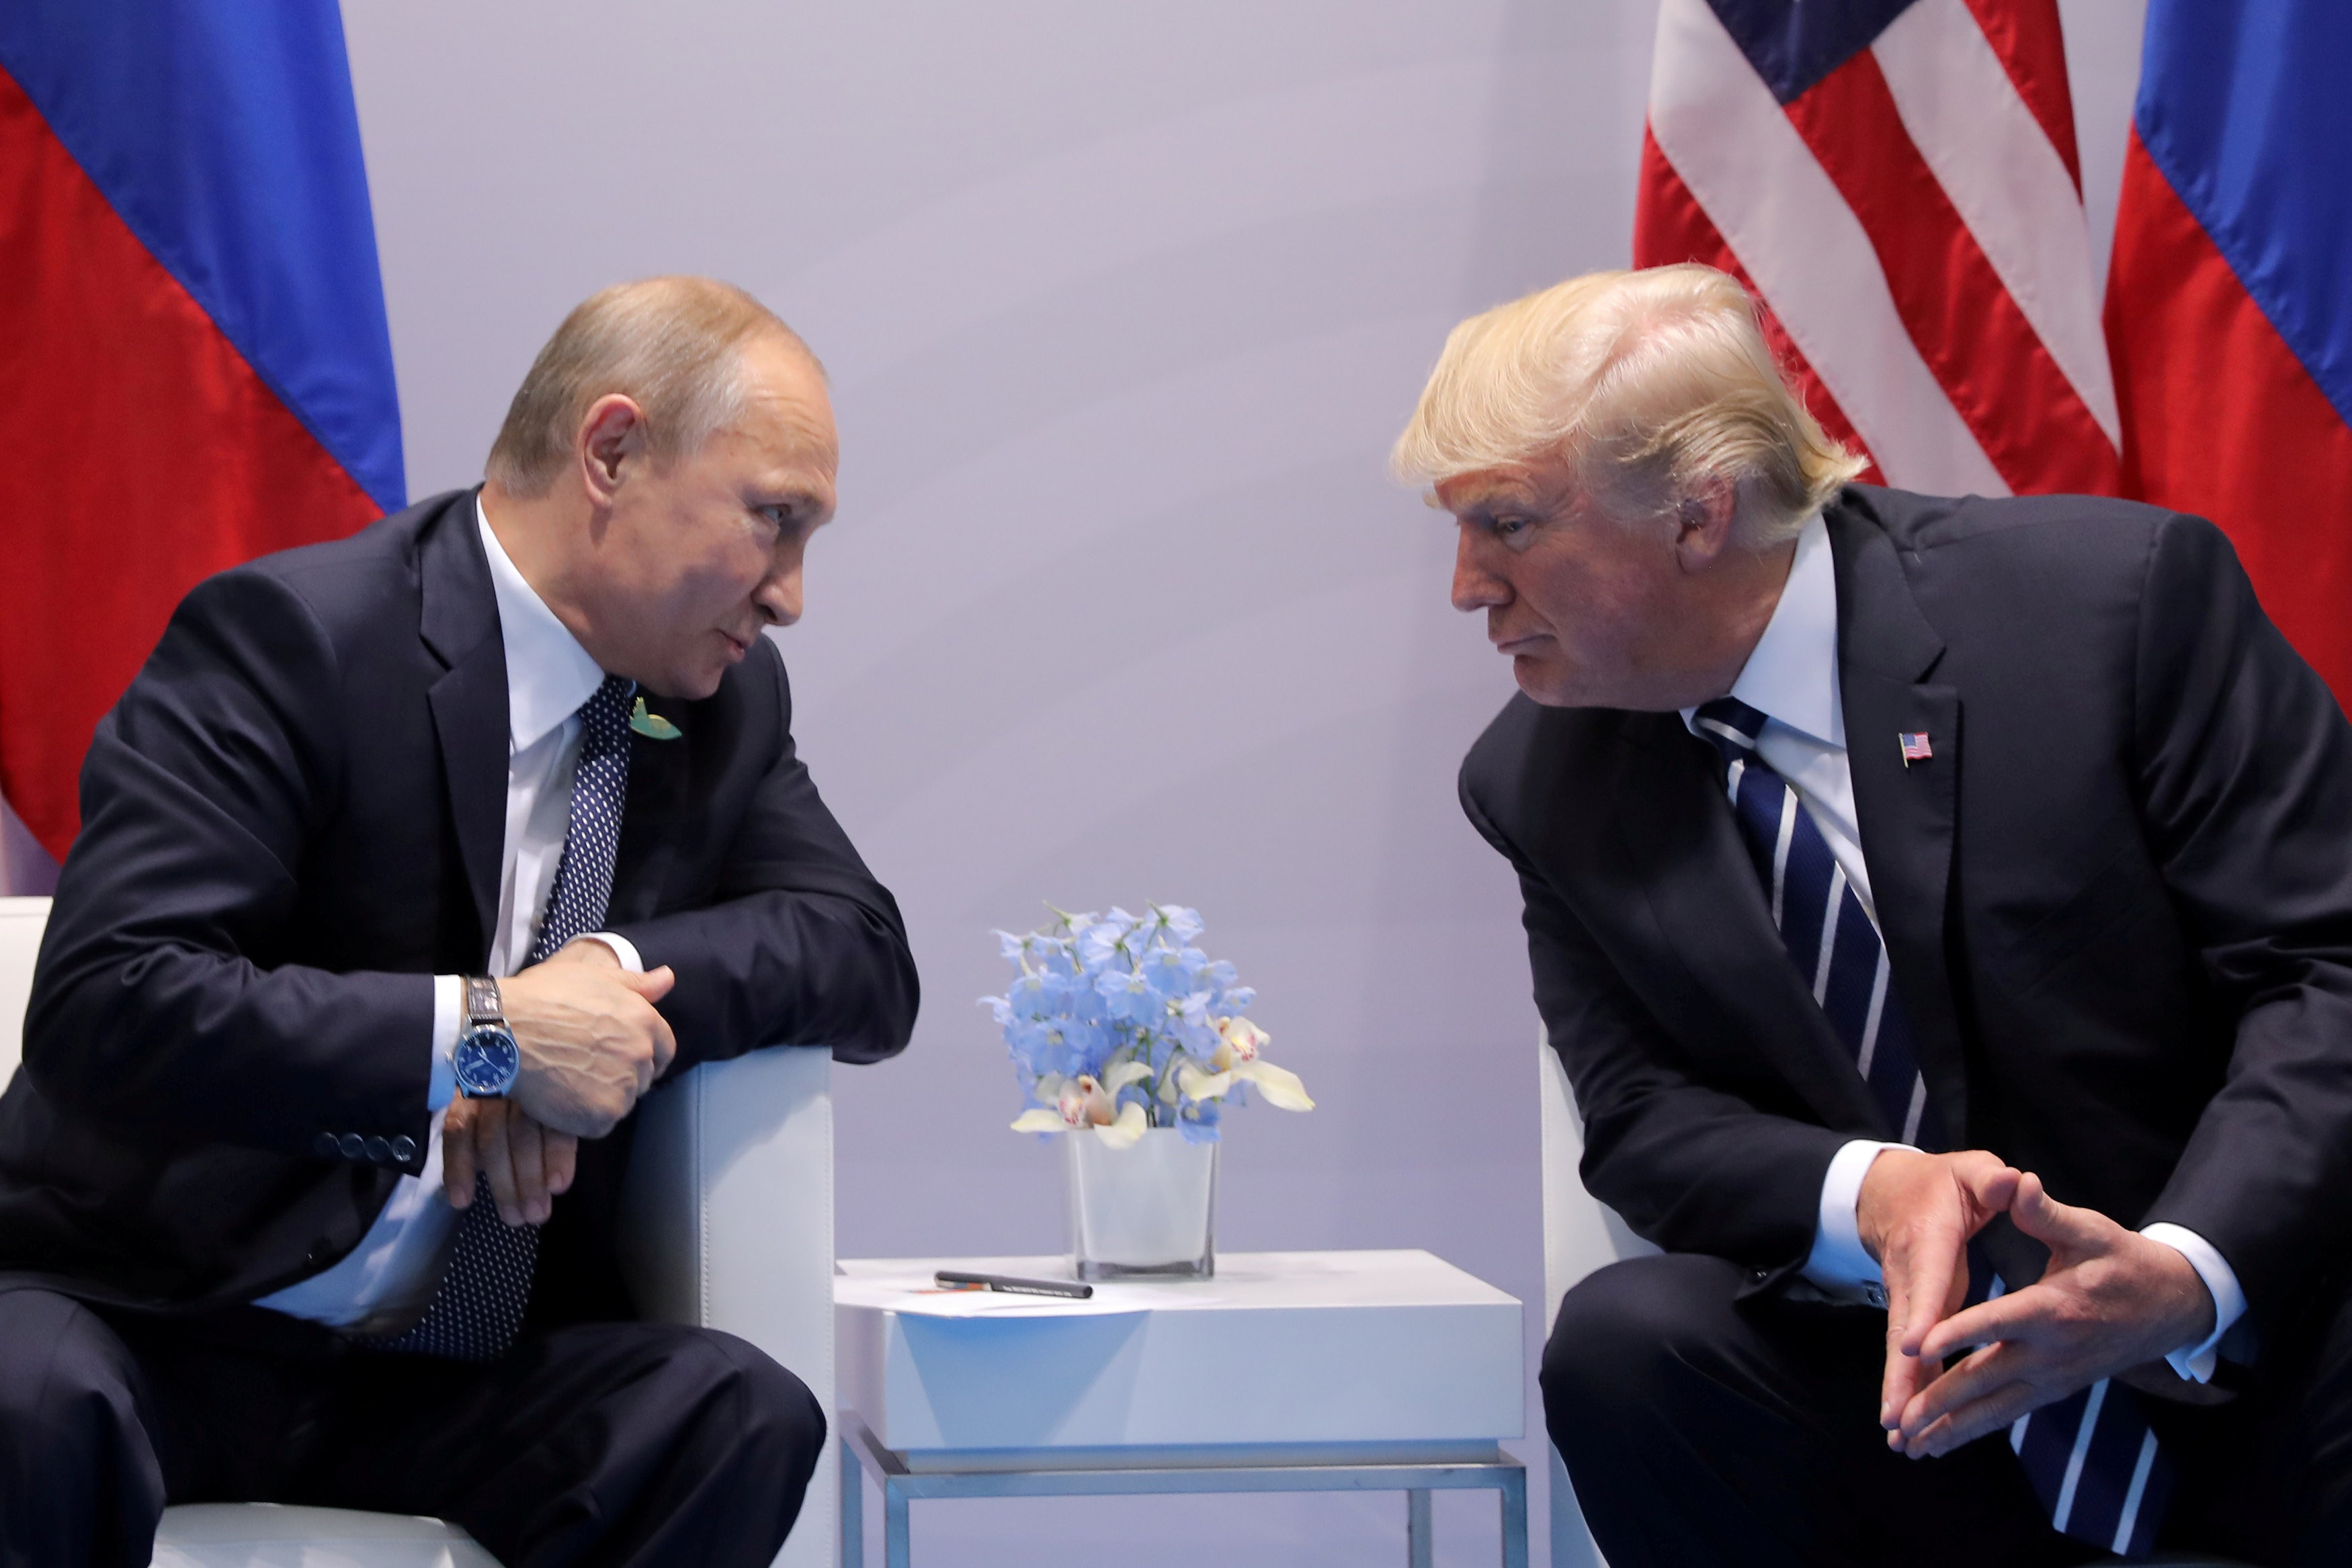 Russian President Vladimir Putin talks to US President Donald Trump during their bilateral meeting at the G20 summit in Hamburg, Germany, in July 2017. Both leaders are known for enthusiastically promoting their versions of the truth. Photo: Reuters